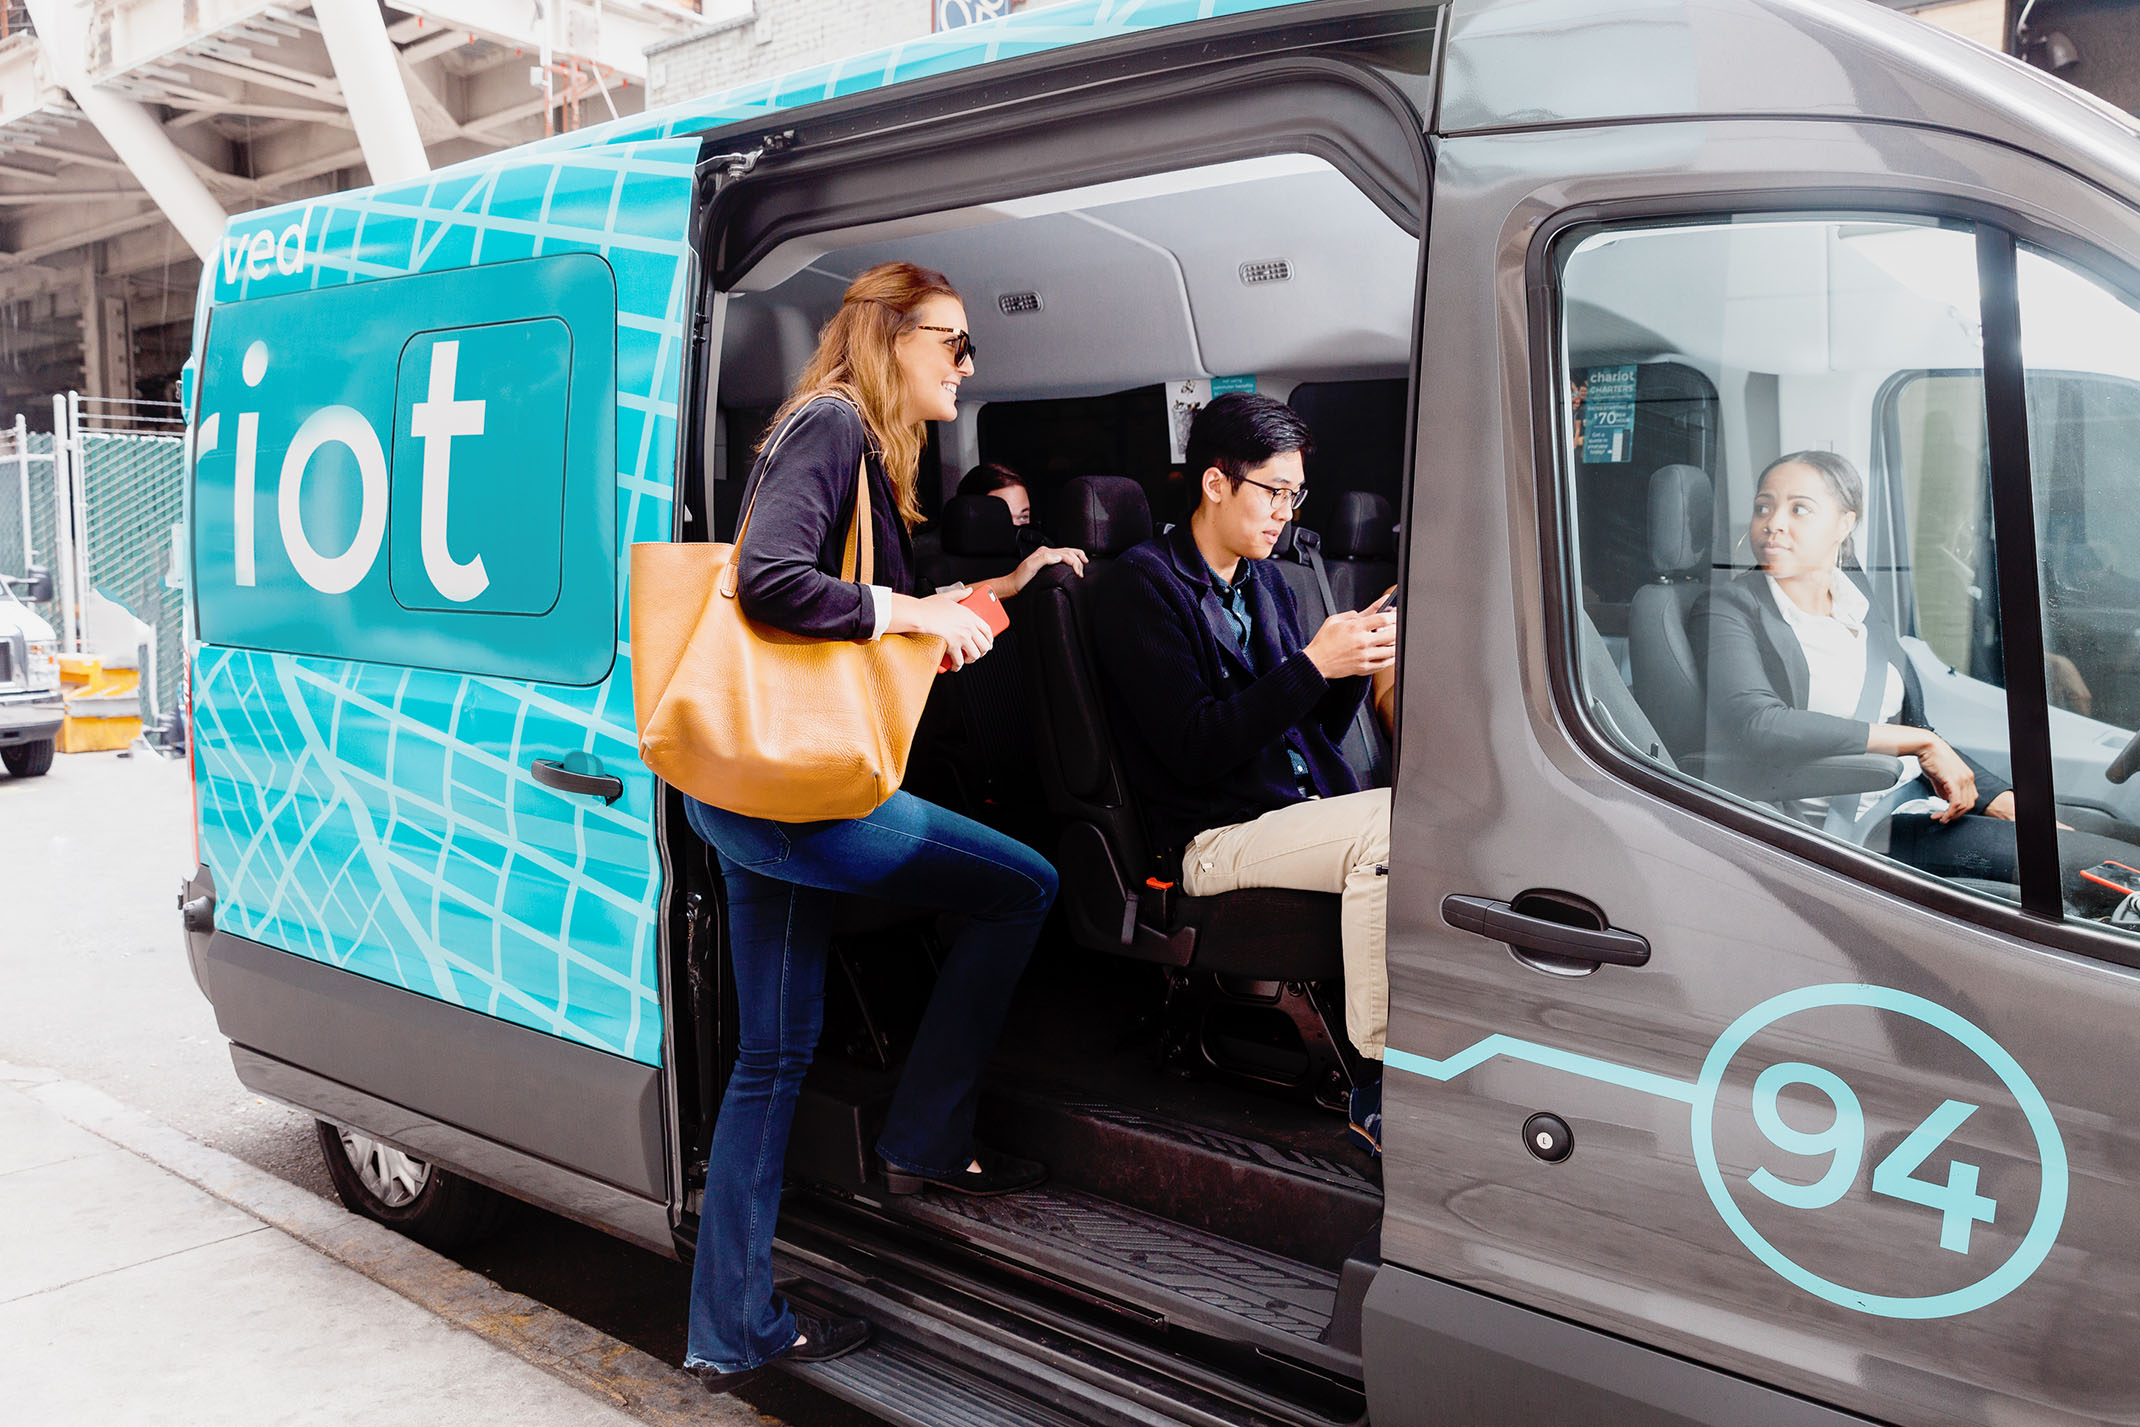 Chariot is a microtransit provider that already uses its own digital rider verification tools. Could it become the basis for a broader trusted rider program in a microtransit mesh? (Image: Ford Motor Company)